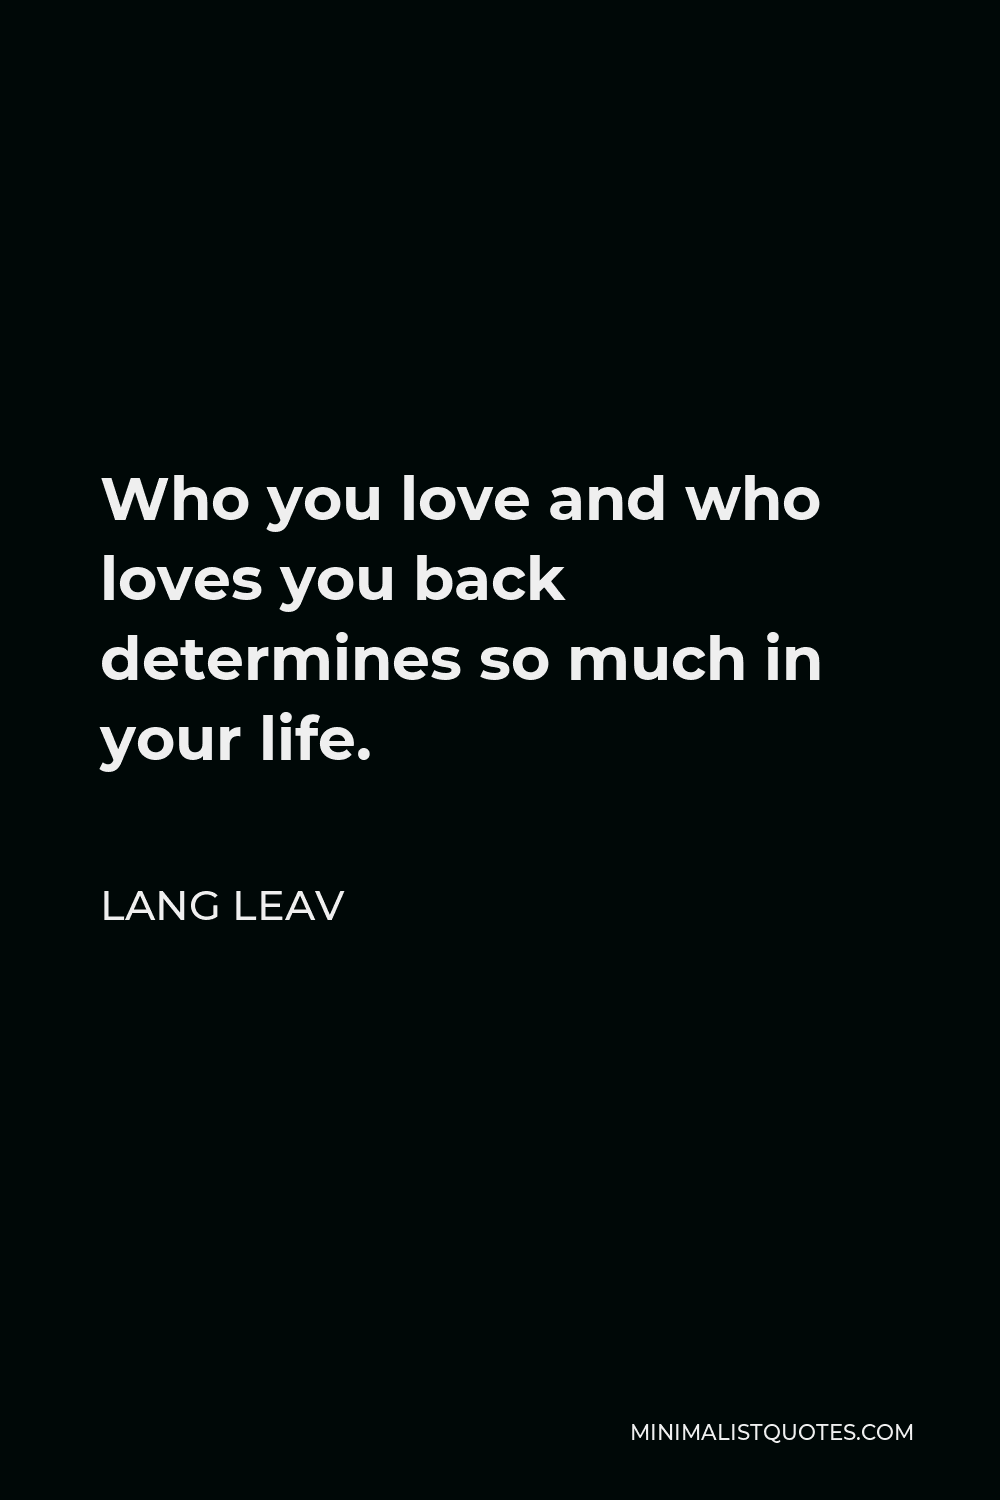 Lang Leav Quote - Who you love and who loves you back determines so much in your life.